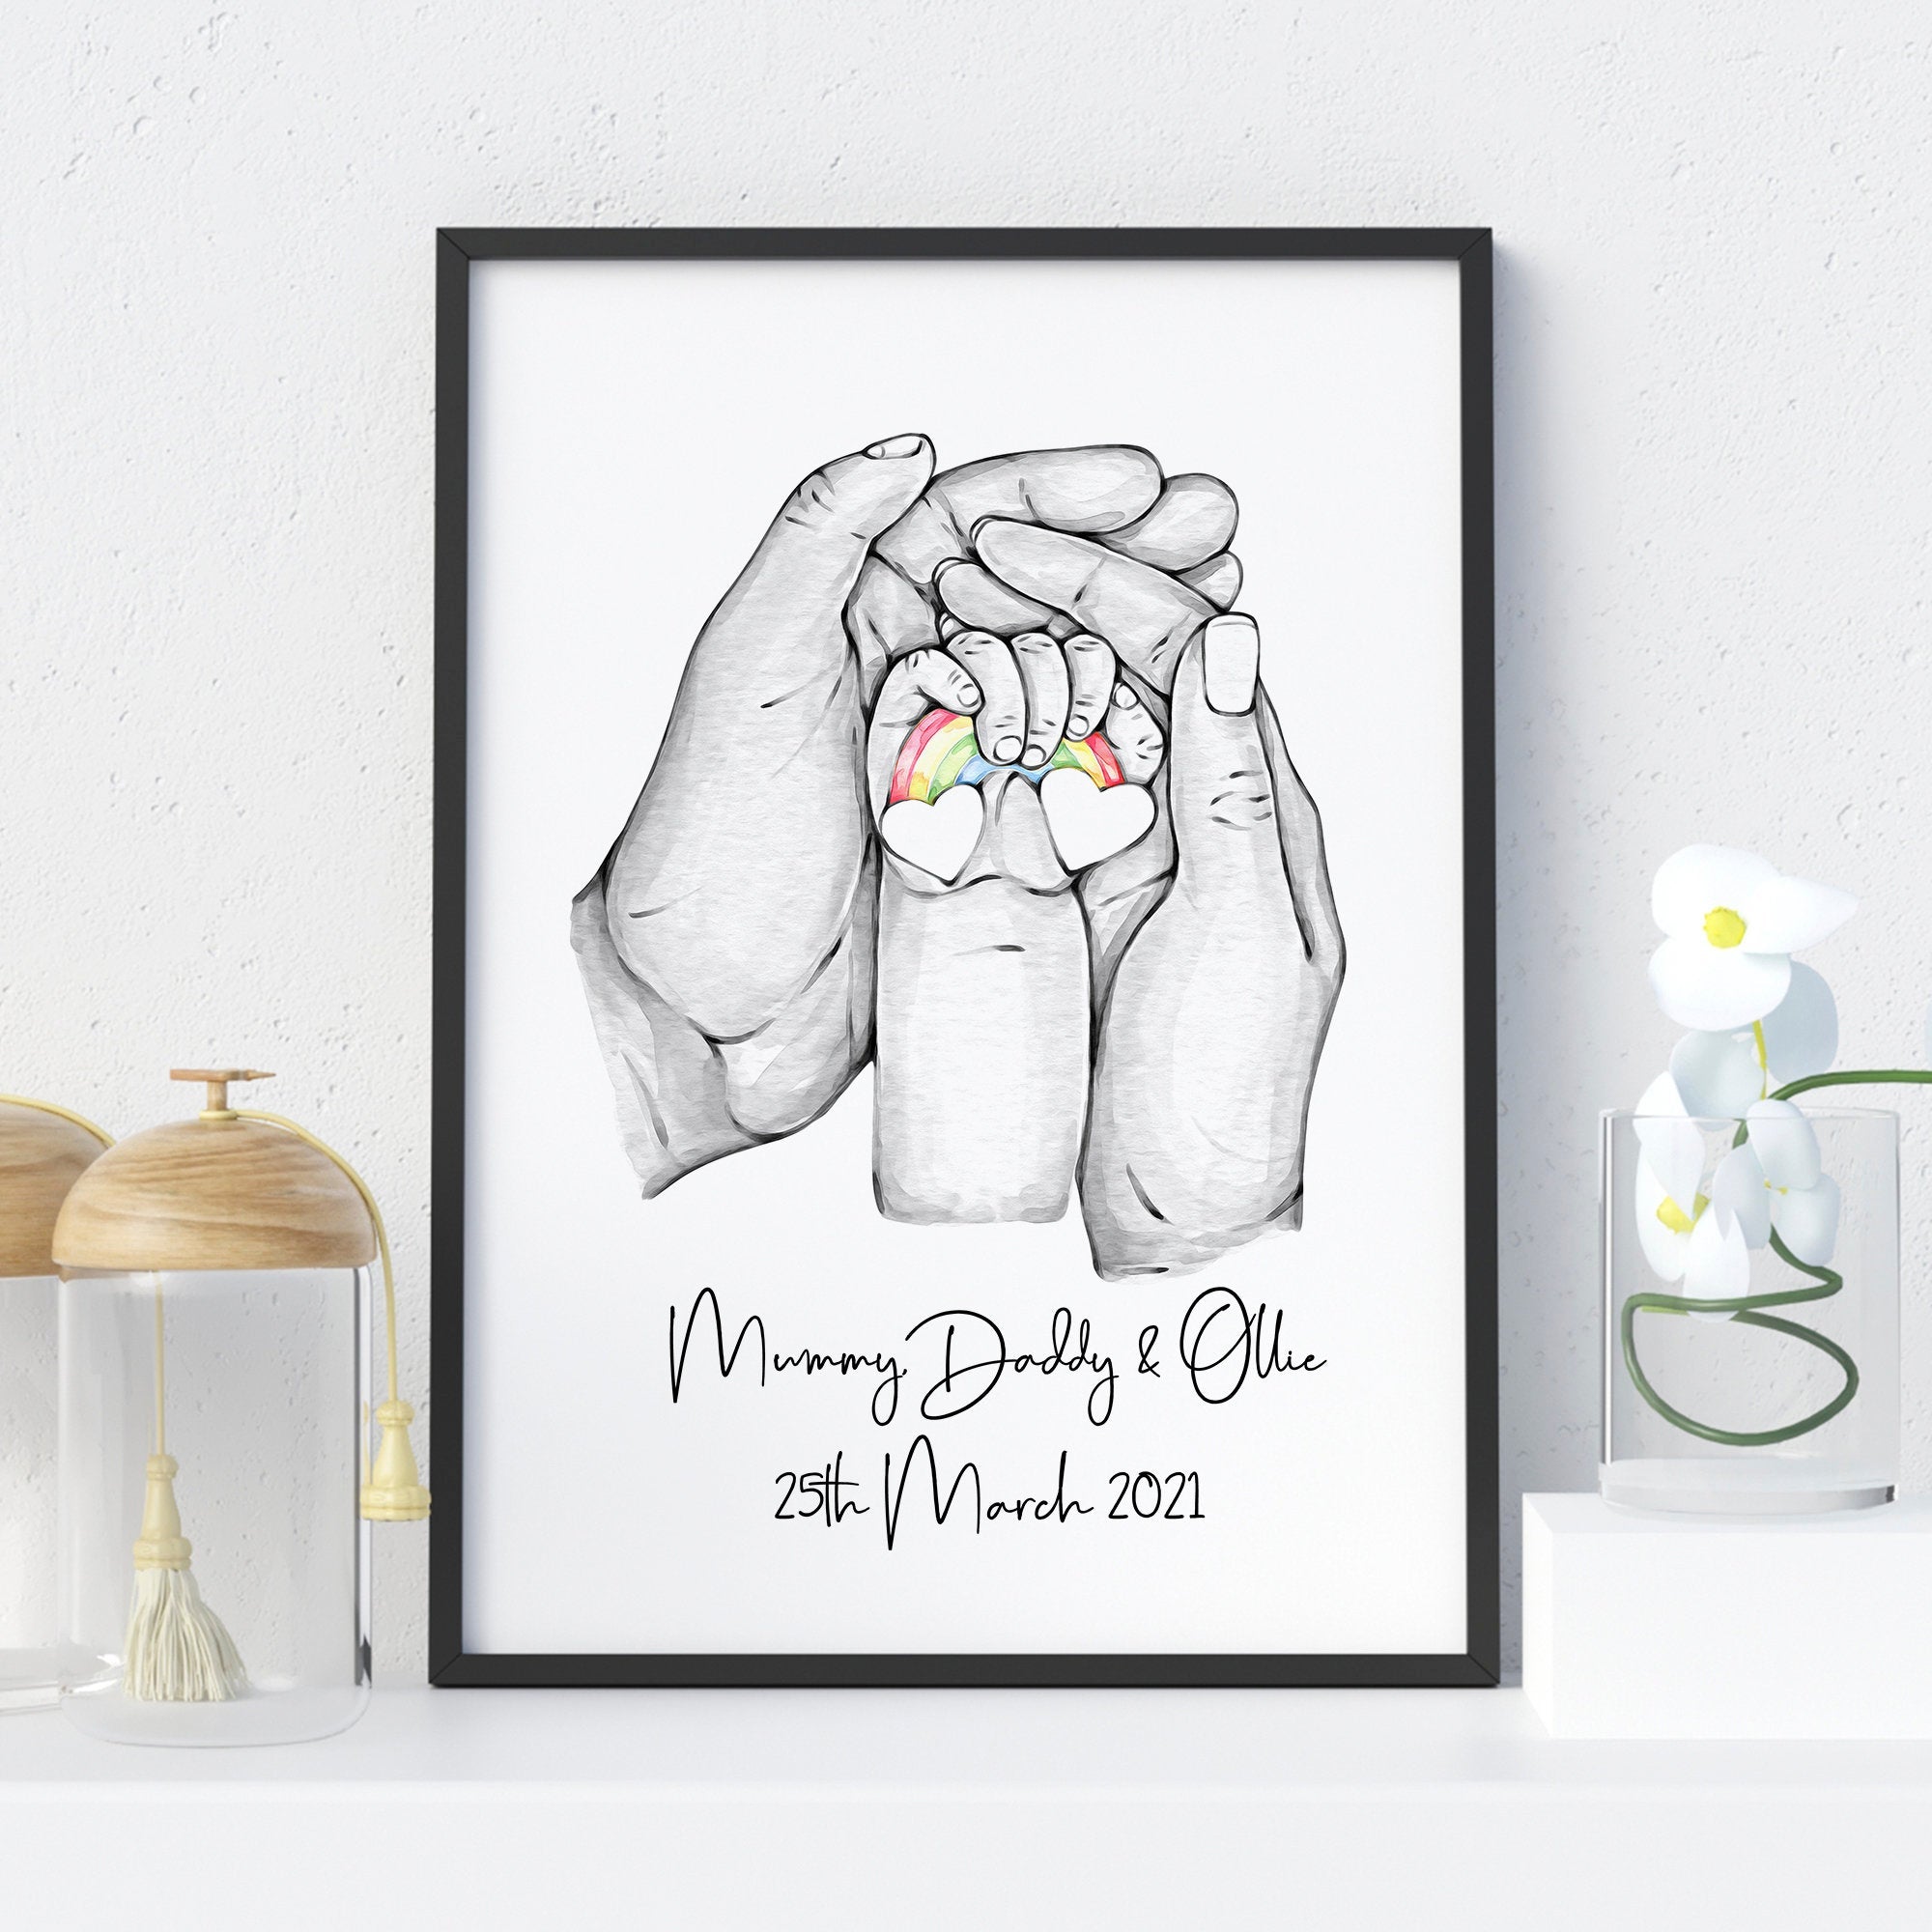 Personalised Child and Parent Rainbow Family Handprint Art - Hold